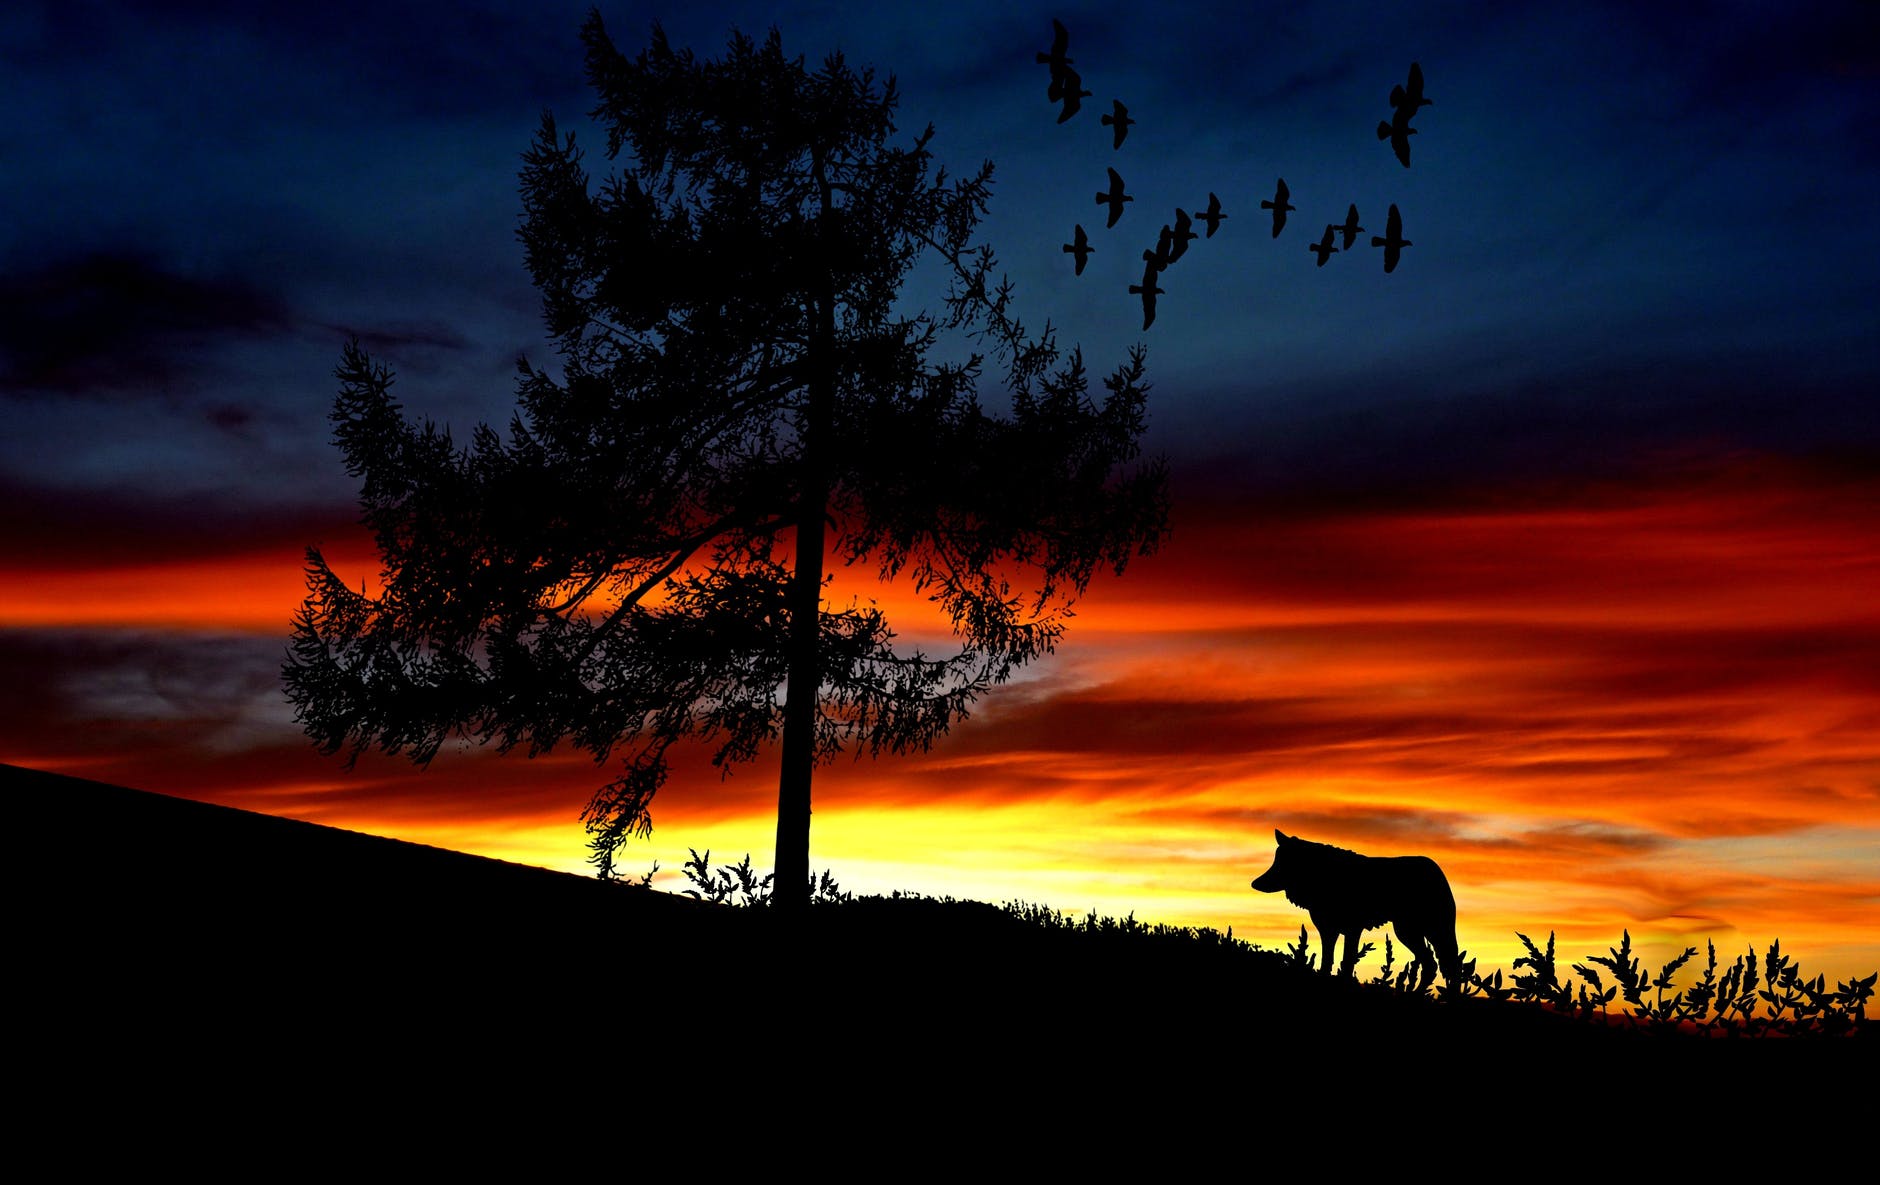 silhouette dog on landscape against romantic sky at sunset